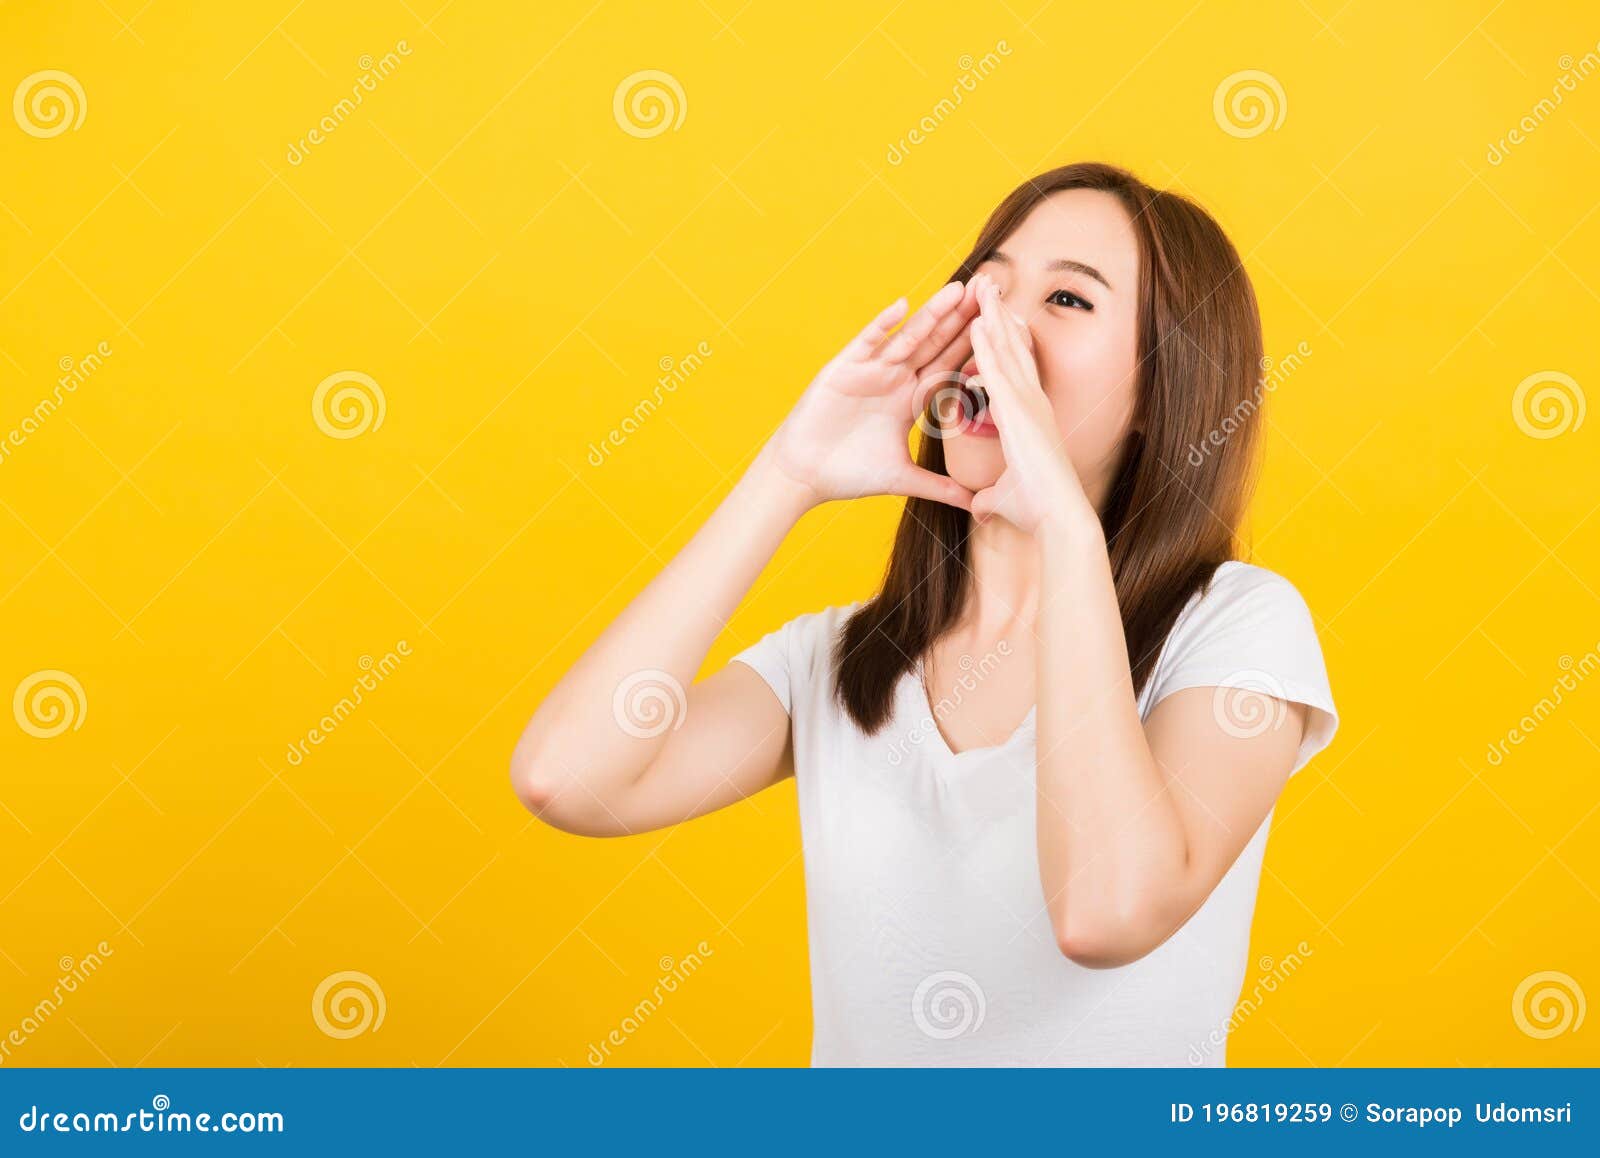 woman teen standing big shout out with hands next mouth giving excited positive